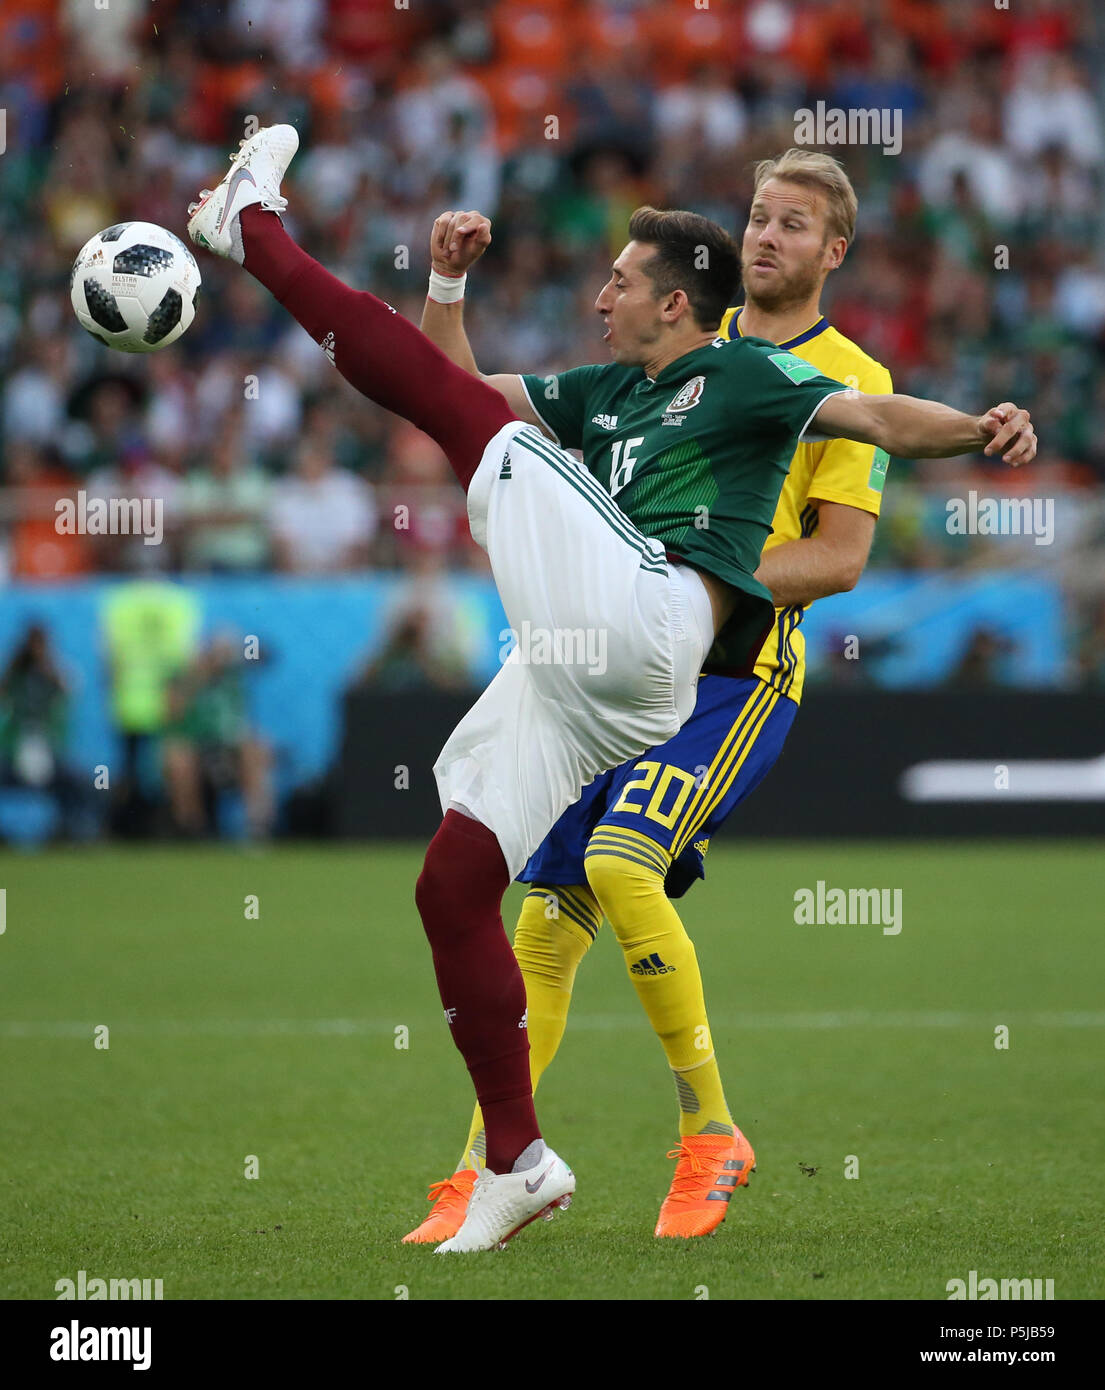 Yekaterinburg, Russia. 27th June, 2018. Hector Herrera (front) of Mexico competes during the 2018 FIFA World Cup Group F match between Mexico and Sweden in Yekaterinburg, Russia, June 27, 2018. Credit: Li Ming/Xinhua/Alamy Live News Stock Photo